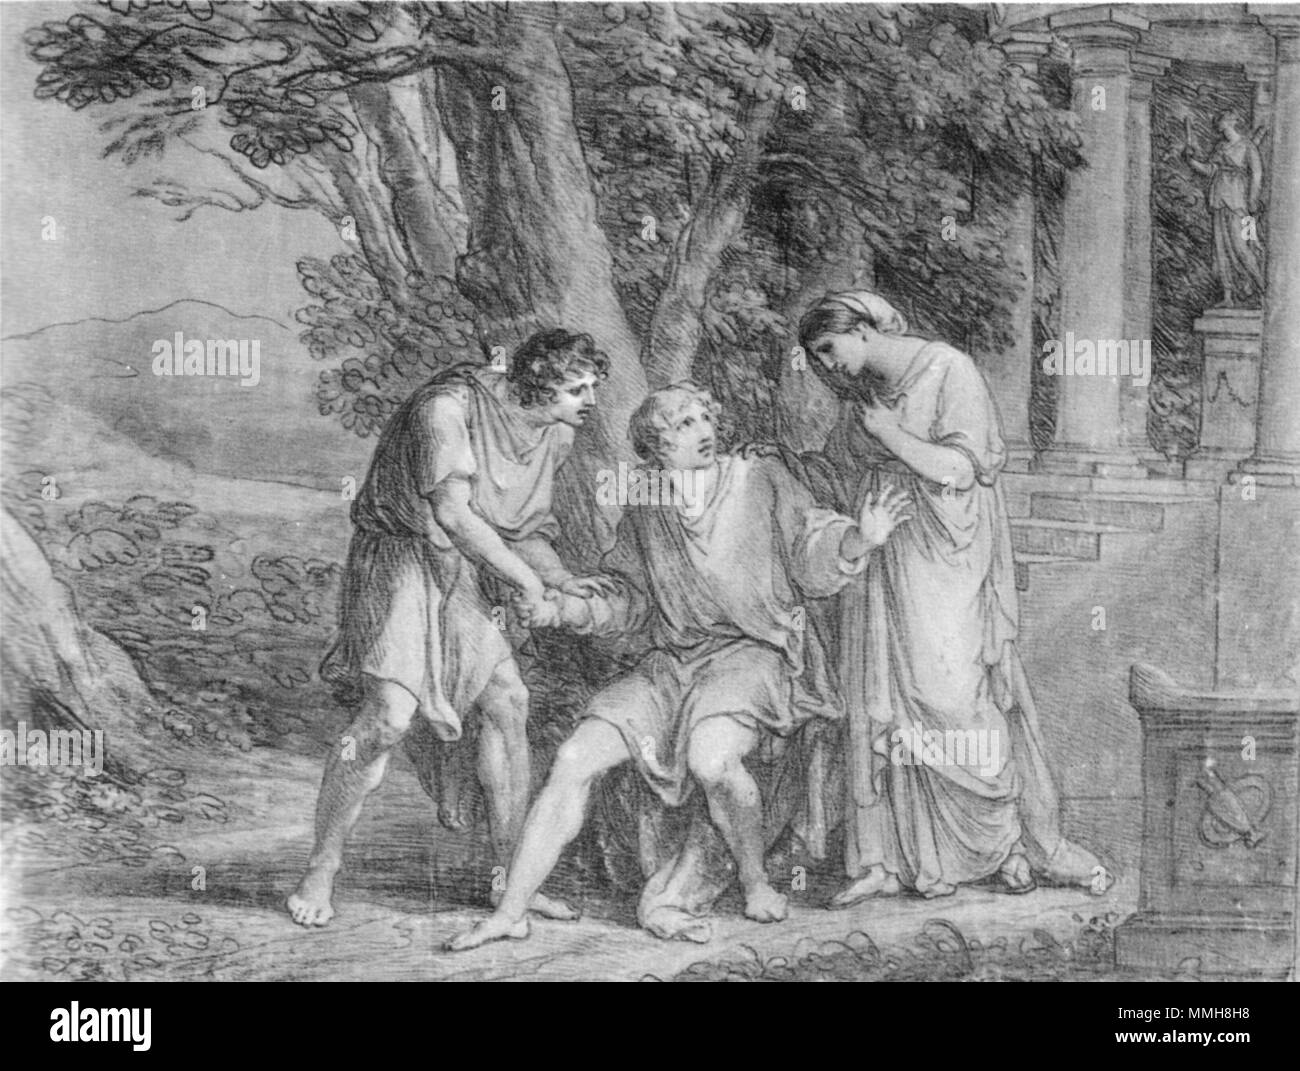 . Act three, scene three from Goethe's Iphigenia in Tauris. Drawing. Première of final version of play in Weimar in 1802. Goethe, playing Orestes, seated in the centre.  . 1802.   Angelica Kauffman  (1741–1807)      Alternative names Angelika Kauffmann, Maria Anna Angelika Katharina Kauffmann, Angelika Katharina Kauffmann  Description Swiss-British painter  Date of birth/death 30 October 1741 5 November 1807  Location of birth/death Chur Rome  Work location London, Rome, Schwarzenberg  Authority control  : Q123098 VIAF:?95148968 ISNI:?0000 0001 2321 3306 ULAN:?500115055 LCCN:?n50044673 NLA:?35 Stock Photo